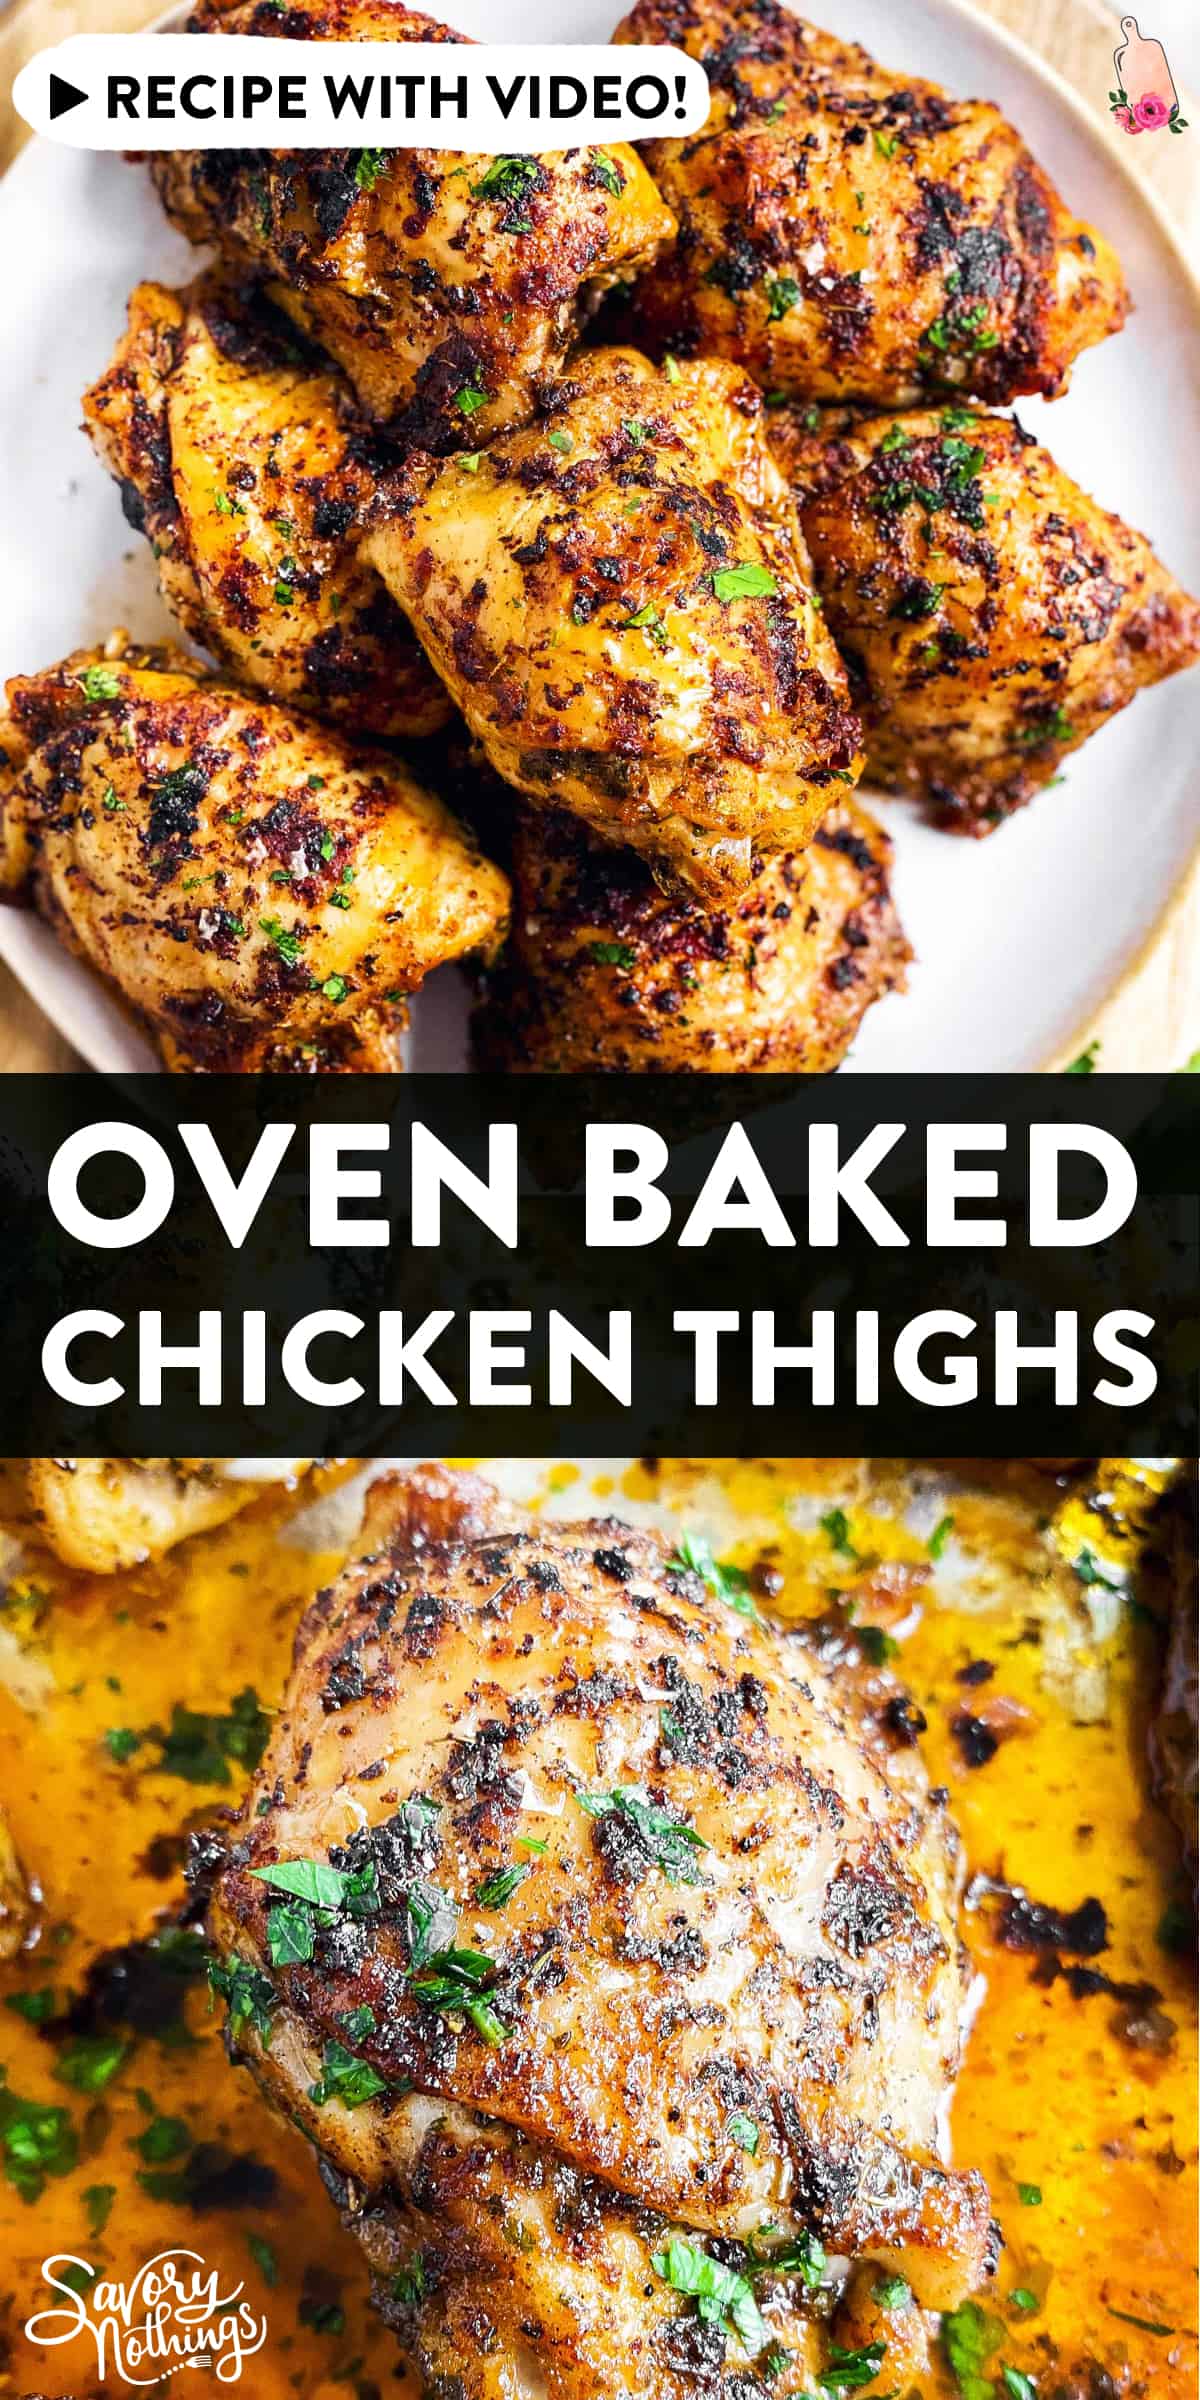 Oven Baked Chicken Thighs Recipe | Savory Nothings